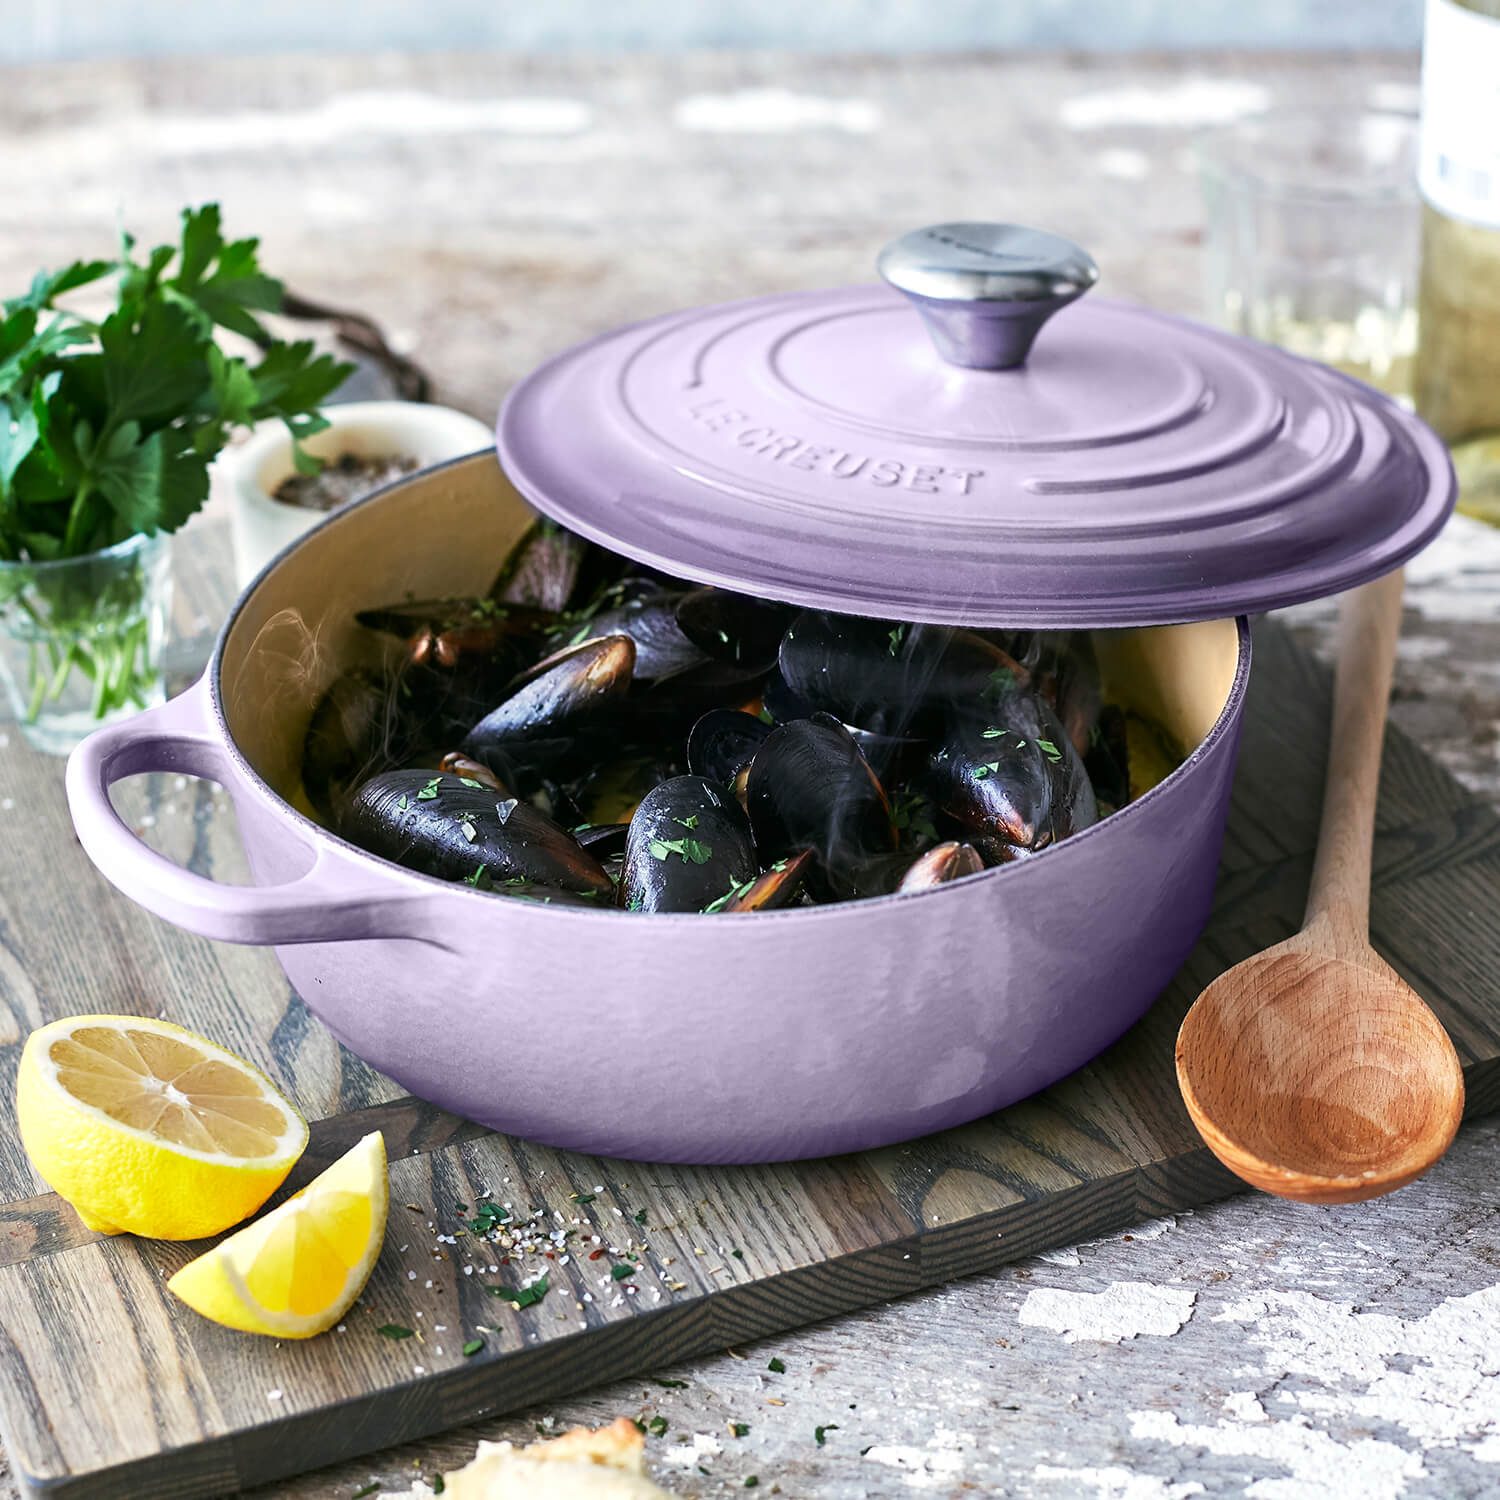 Le Creuset to re-release beautiful matte sugar pink cast iron collection 